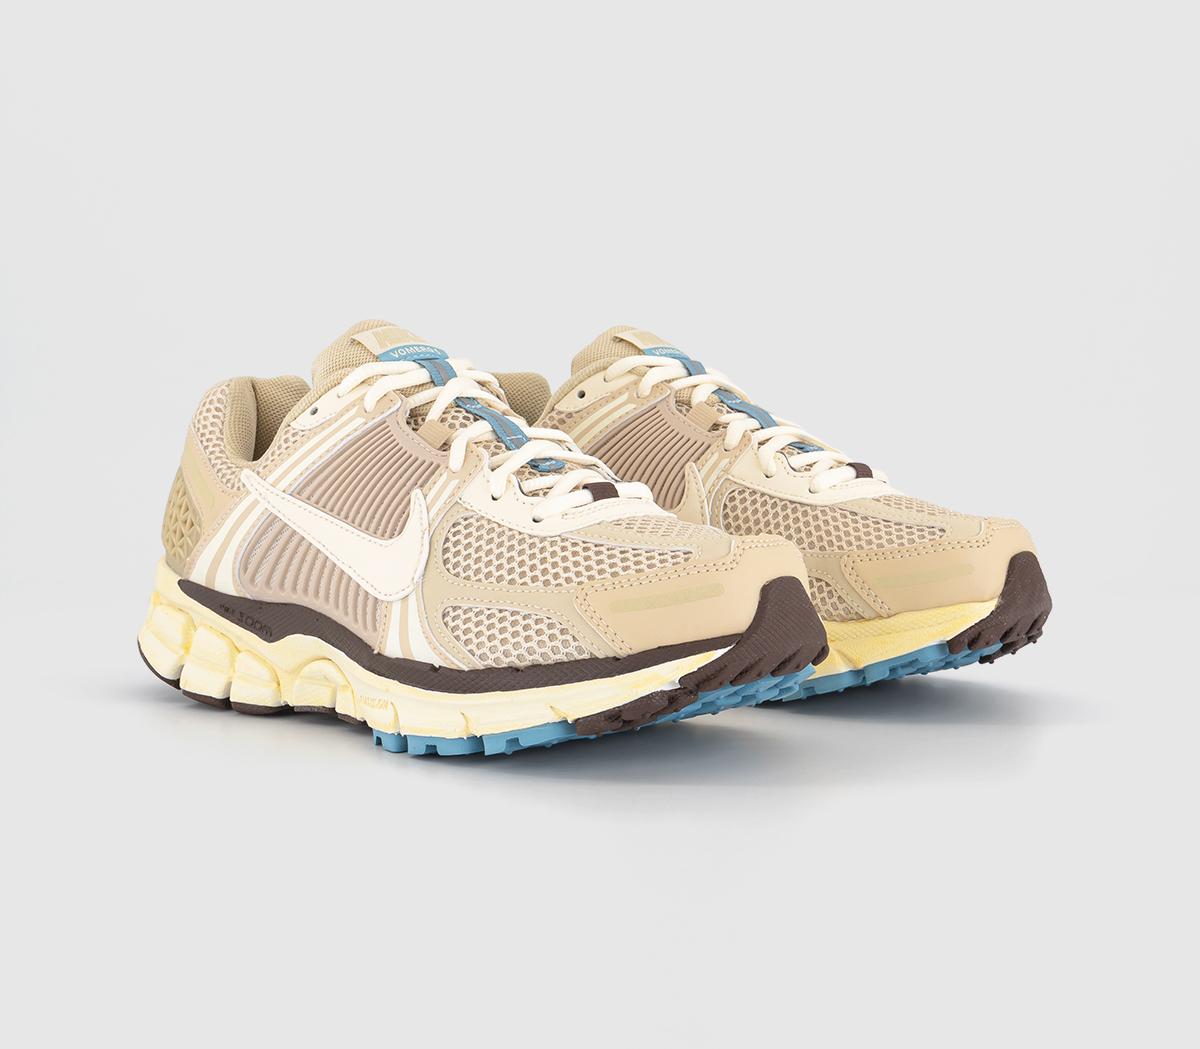 Nike Womens Zoom Vomero 5 Trainers Oatmeal Pale Ivory Sail Light Chocolate Worn Blue Natural, 11